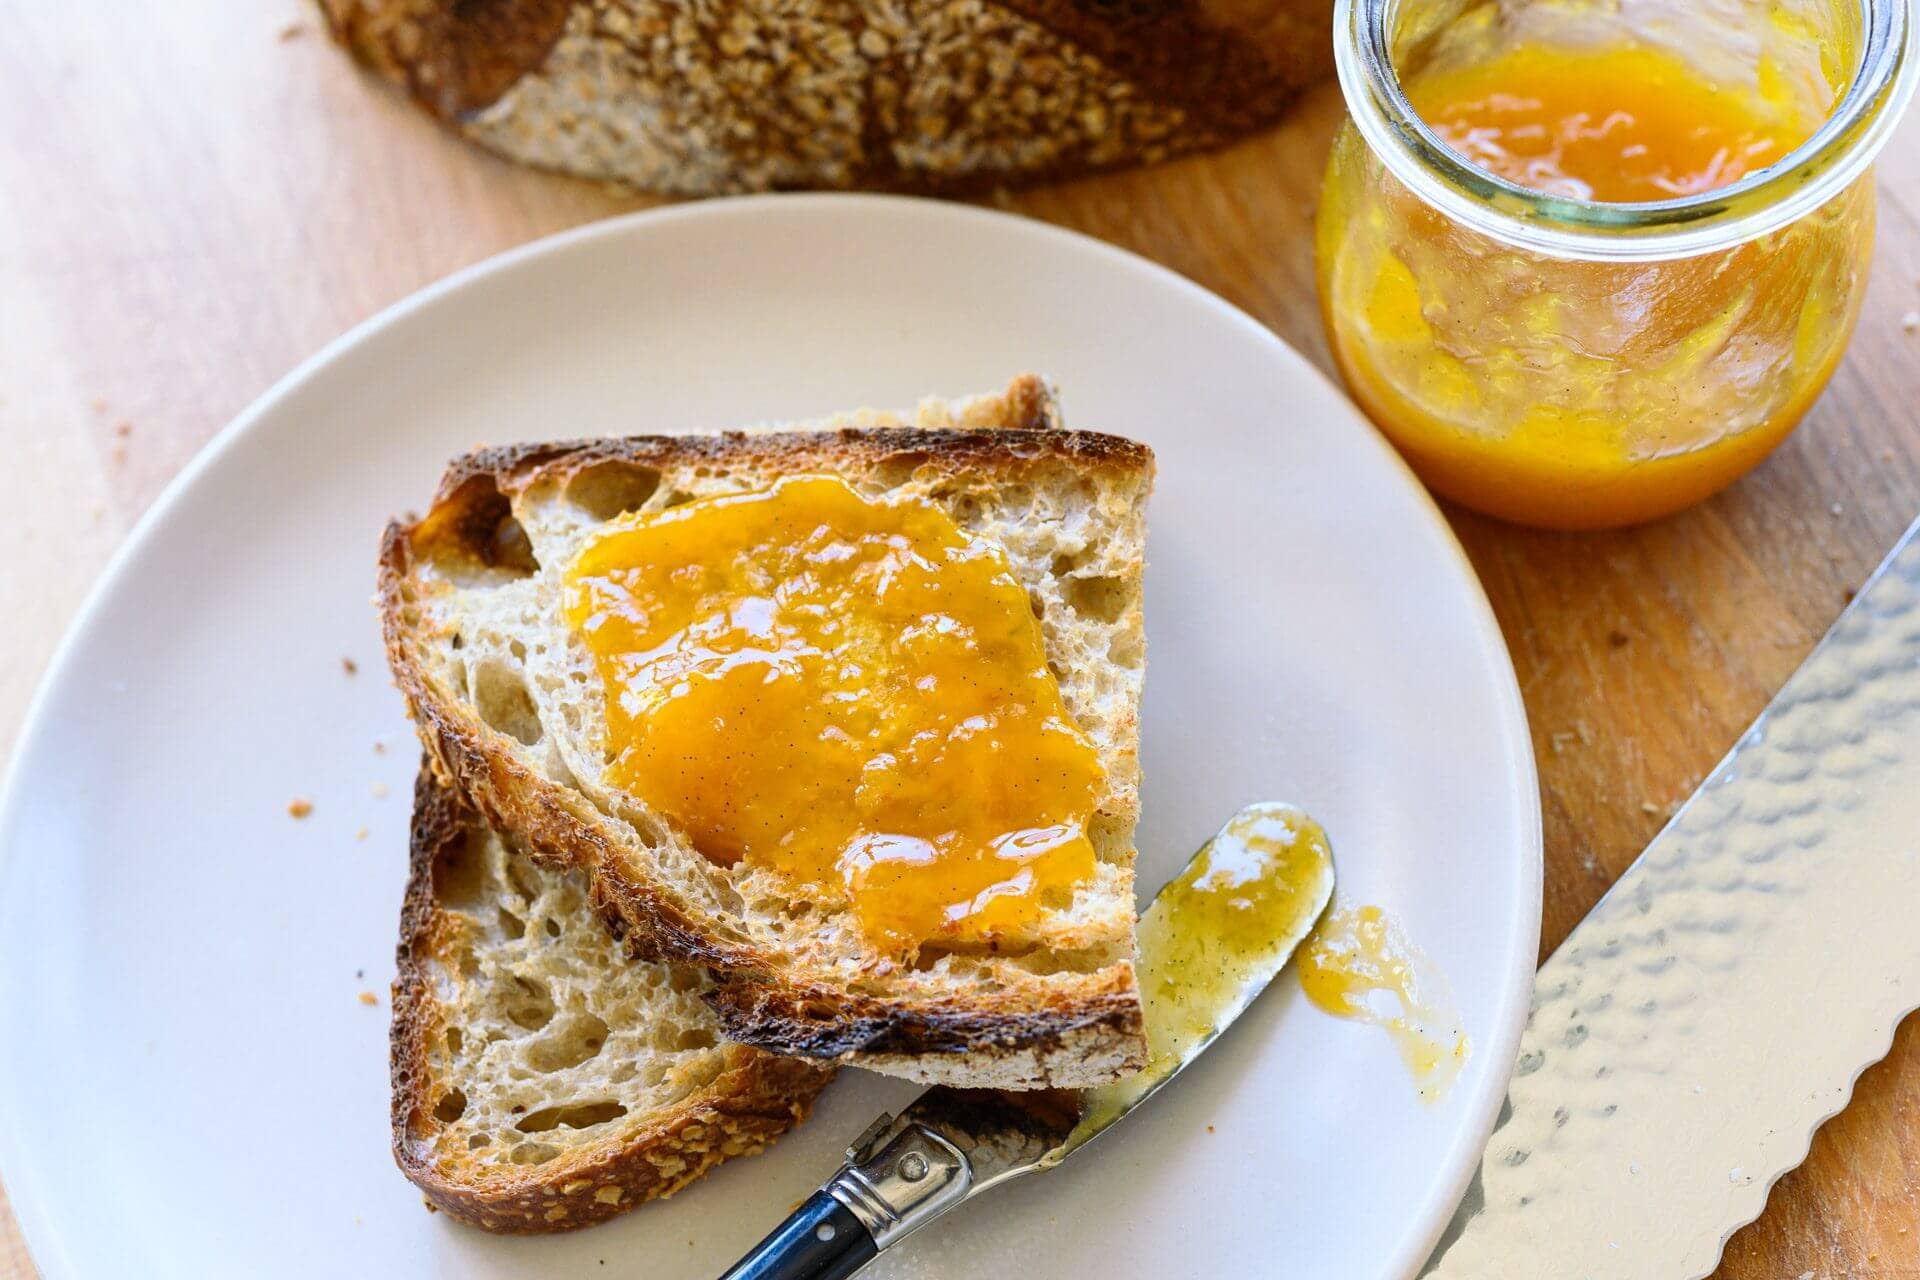 Malted wheat sourdough bread with homemade apricot jam